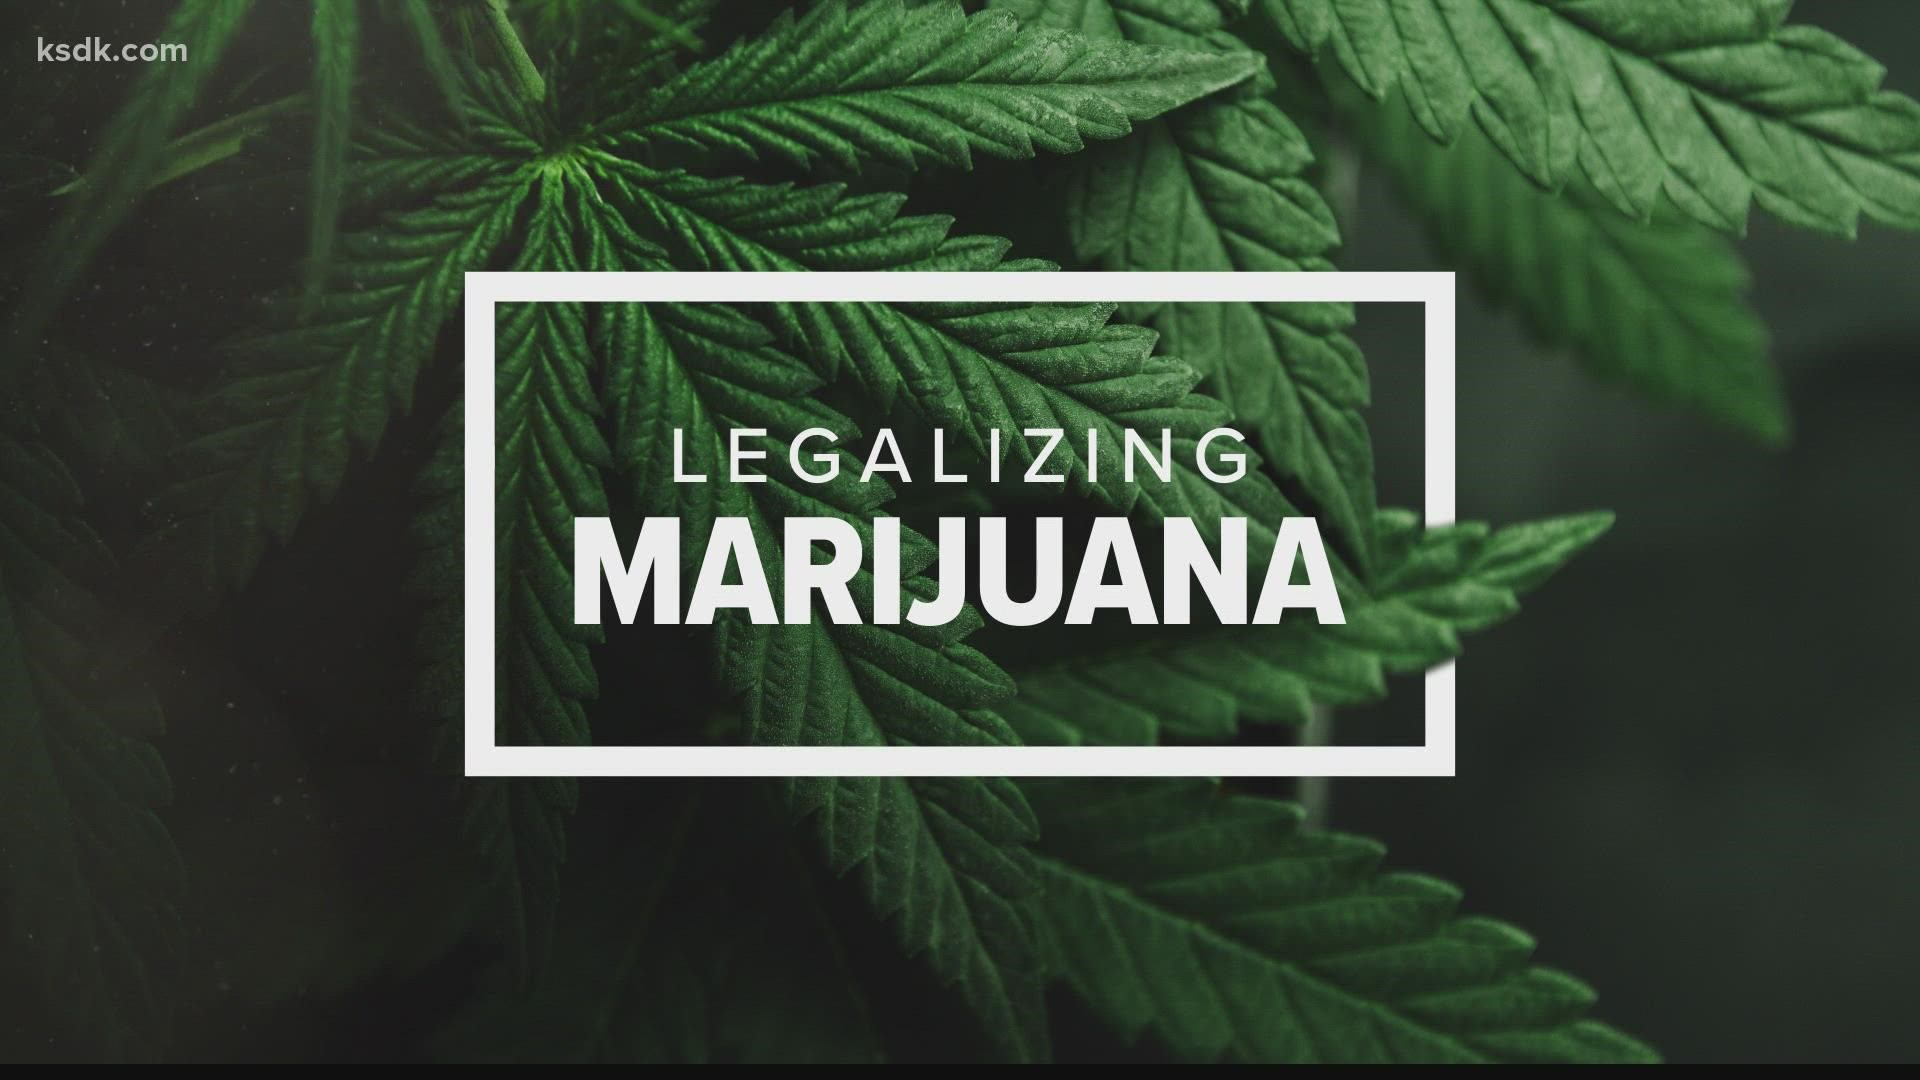 Petition launched for legal pot in Missouri 